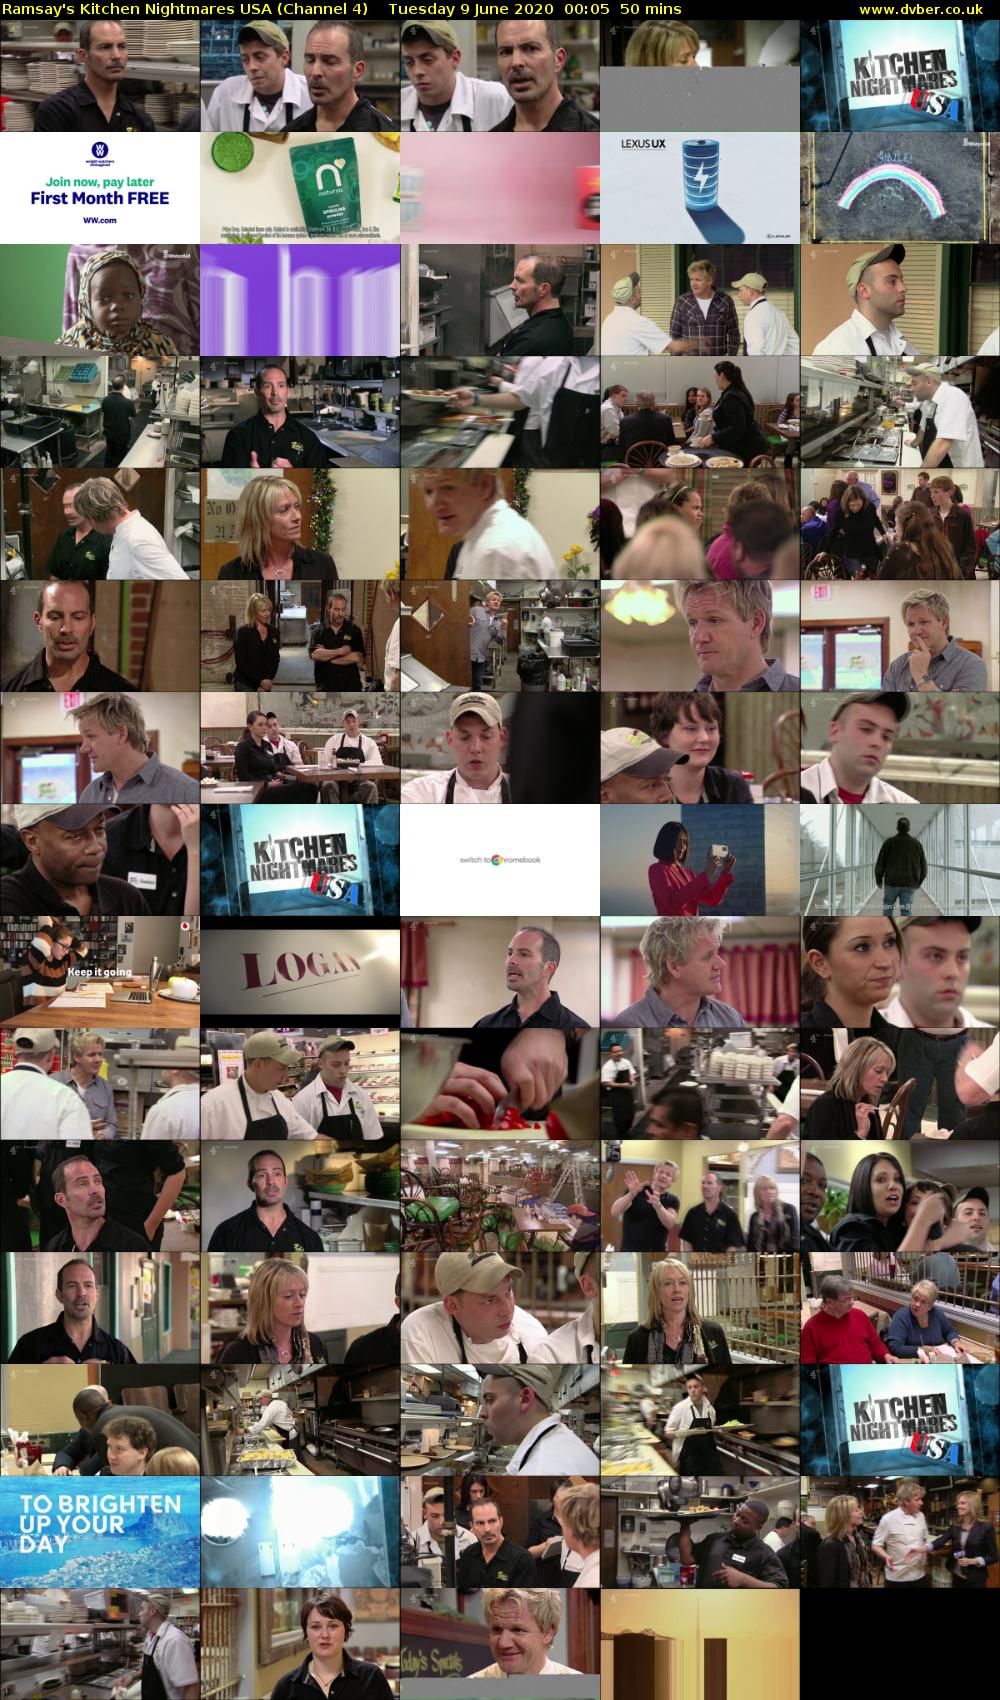 Ramsay's Kitchen Nightmares USA (Channel 4) Tuesday 9 June 2020 00:05 - 00:55